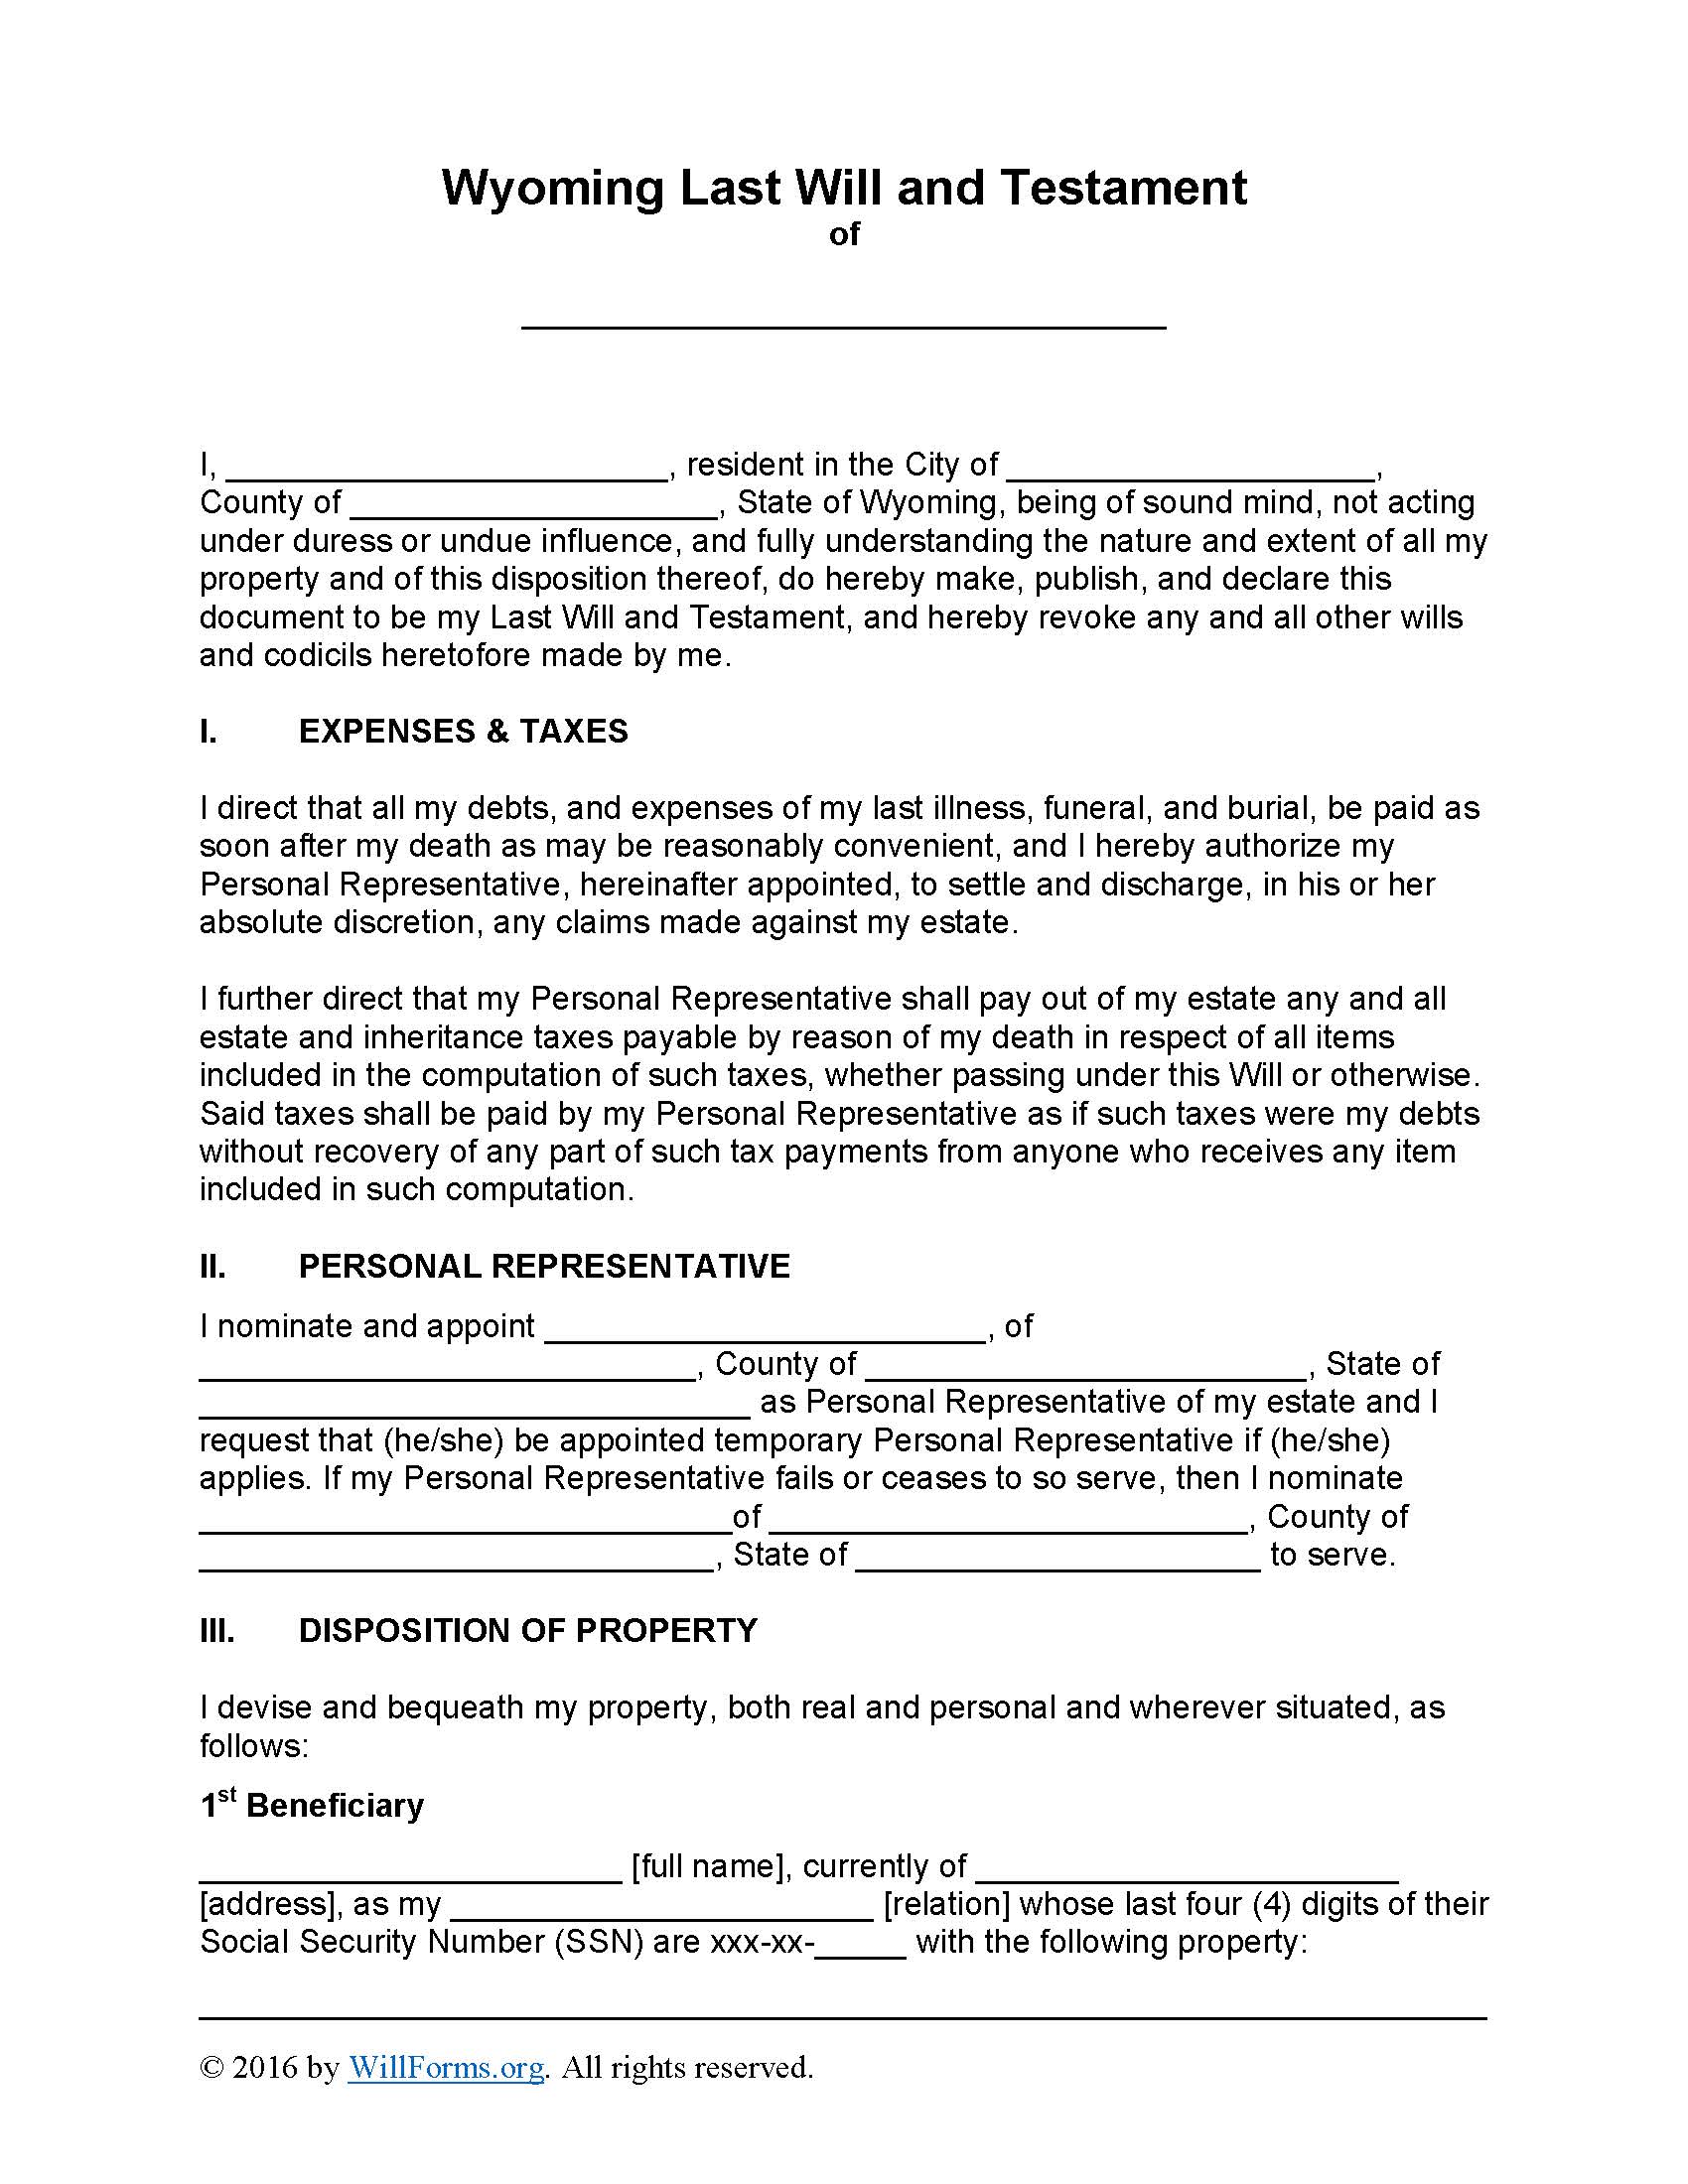 Wyoming Last Will and Testament Form